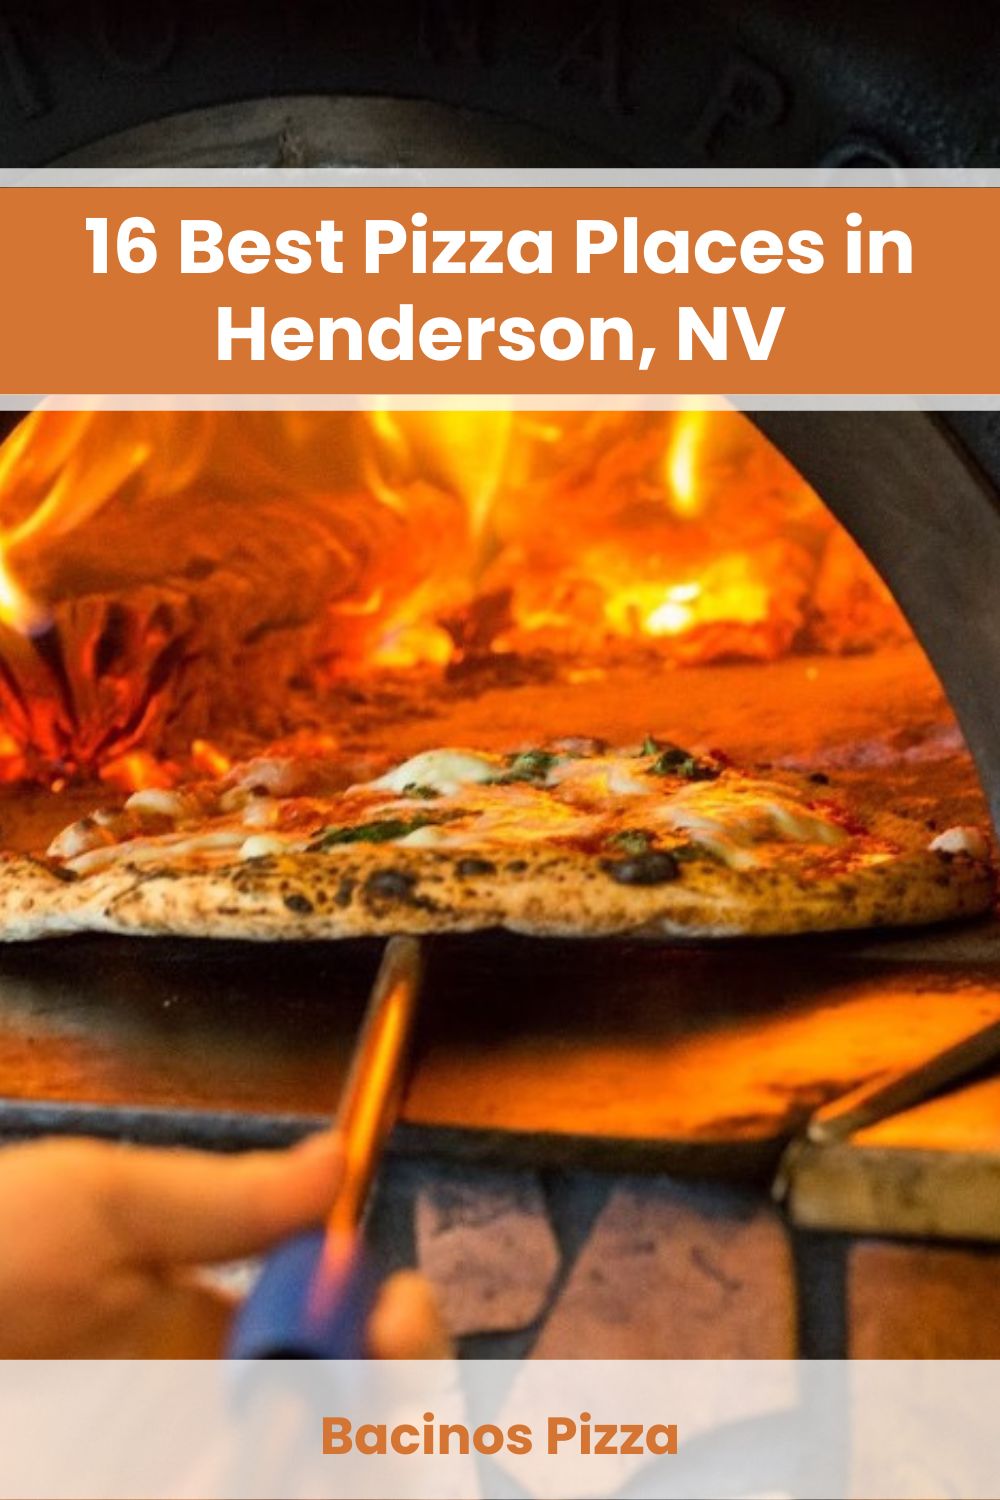 Best Pizza Places in Henderson